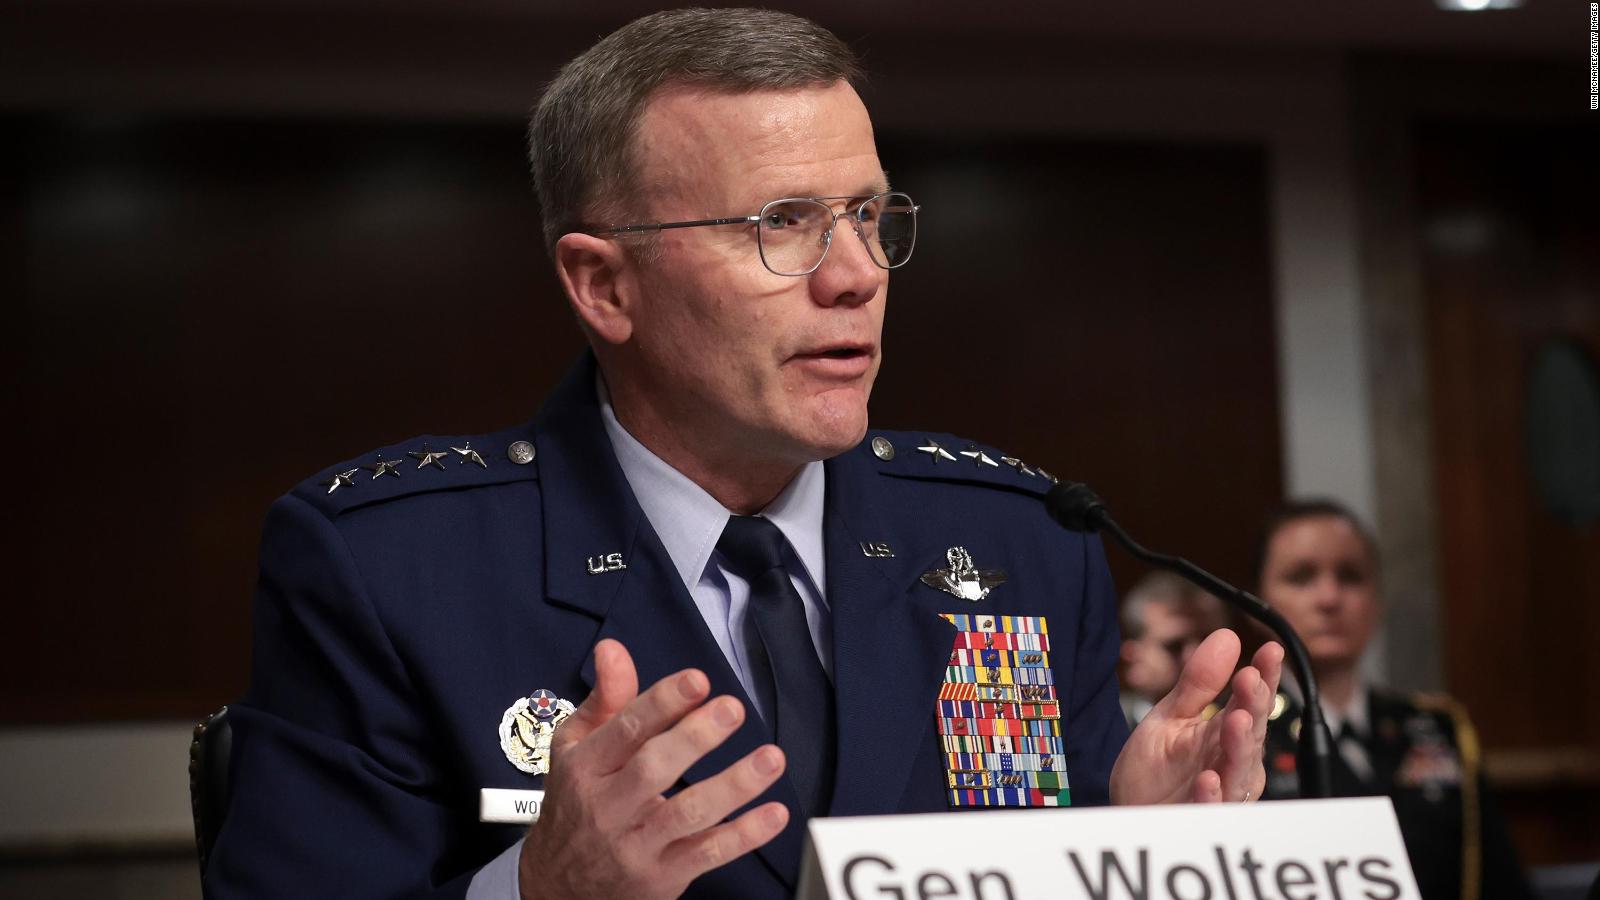 Top US general in Europe says there ‘could be’ an intelligence gap in US that caused US to overestimate Russia’s capabilities (cnn.com)